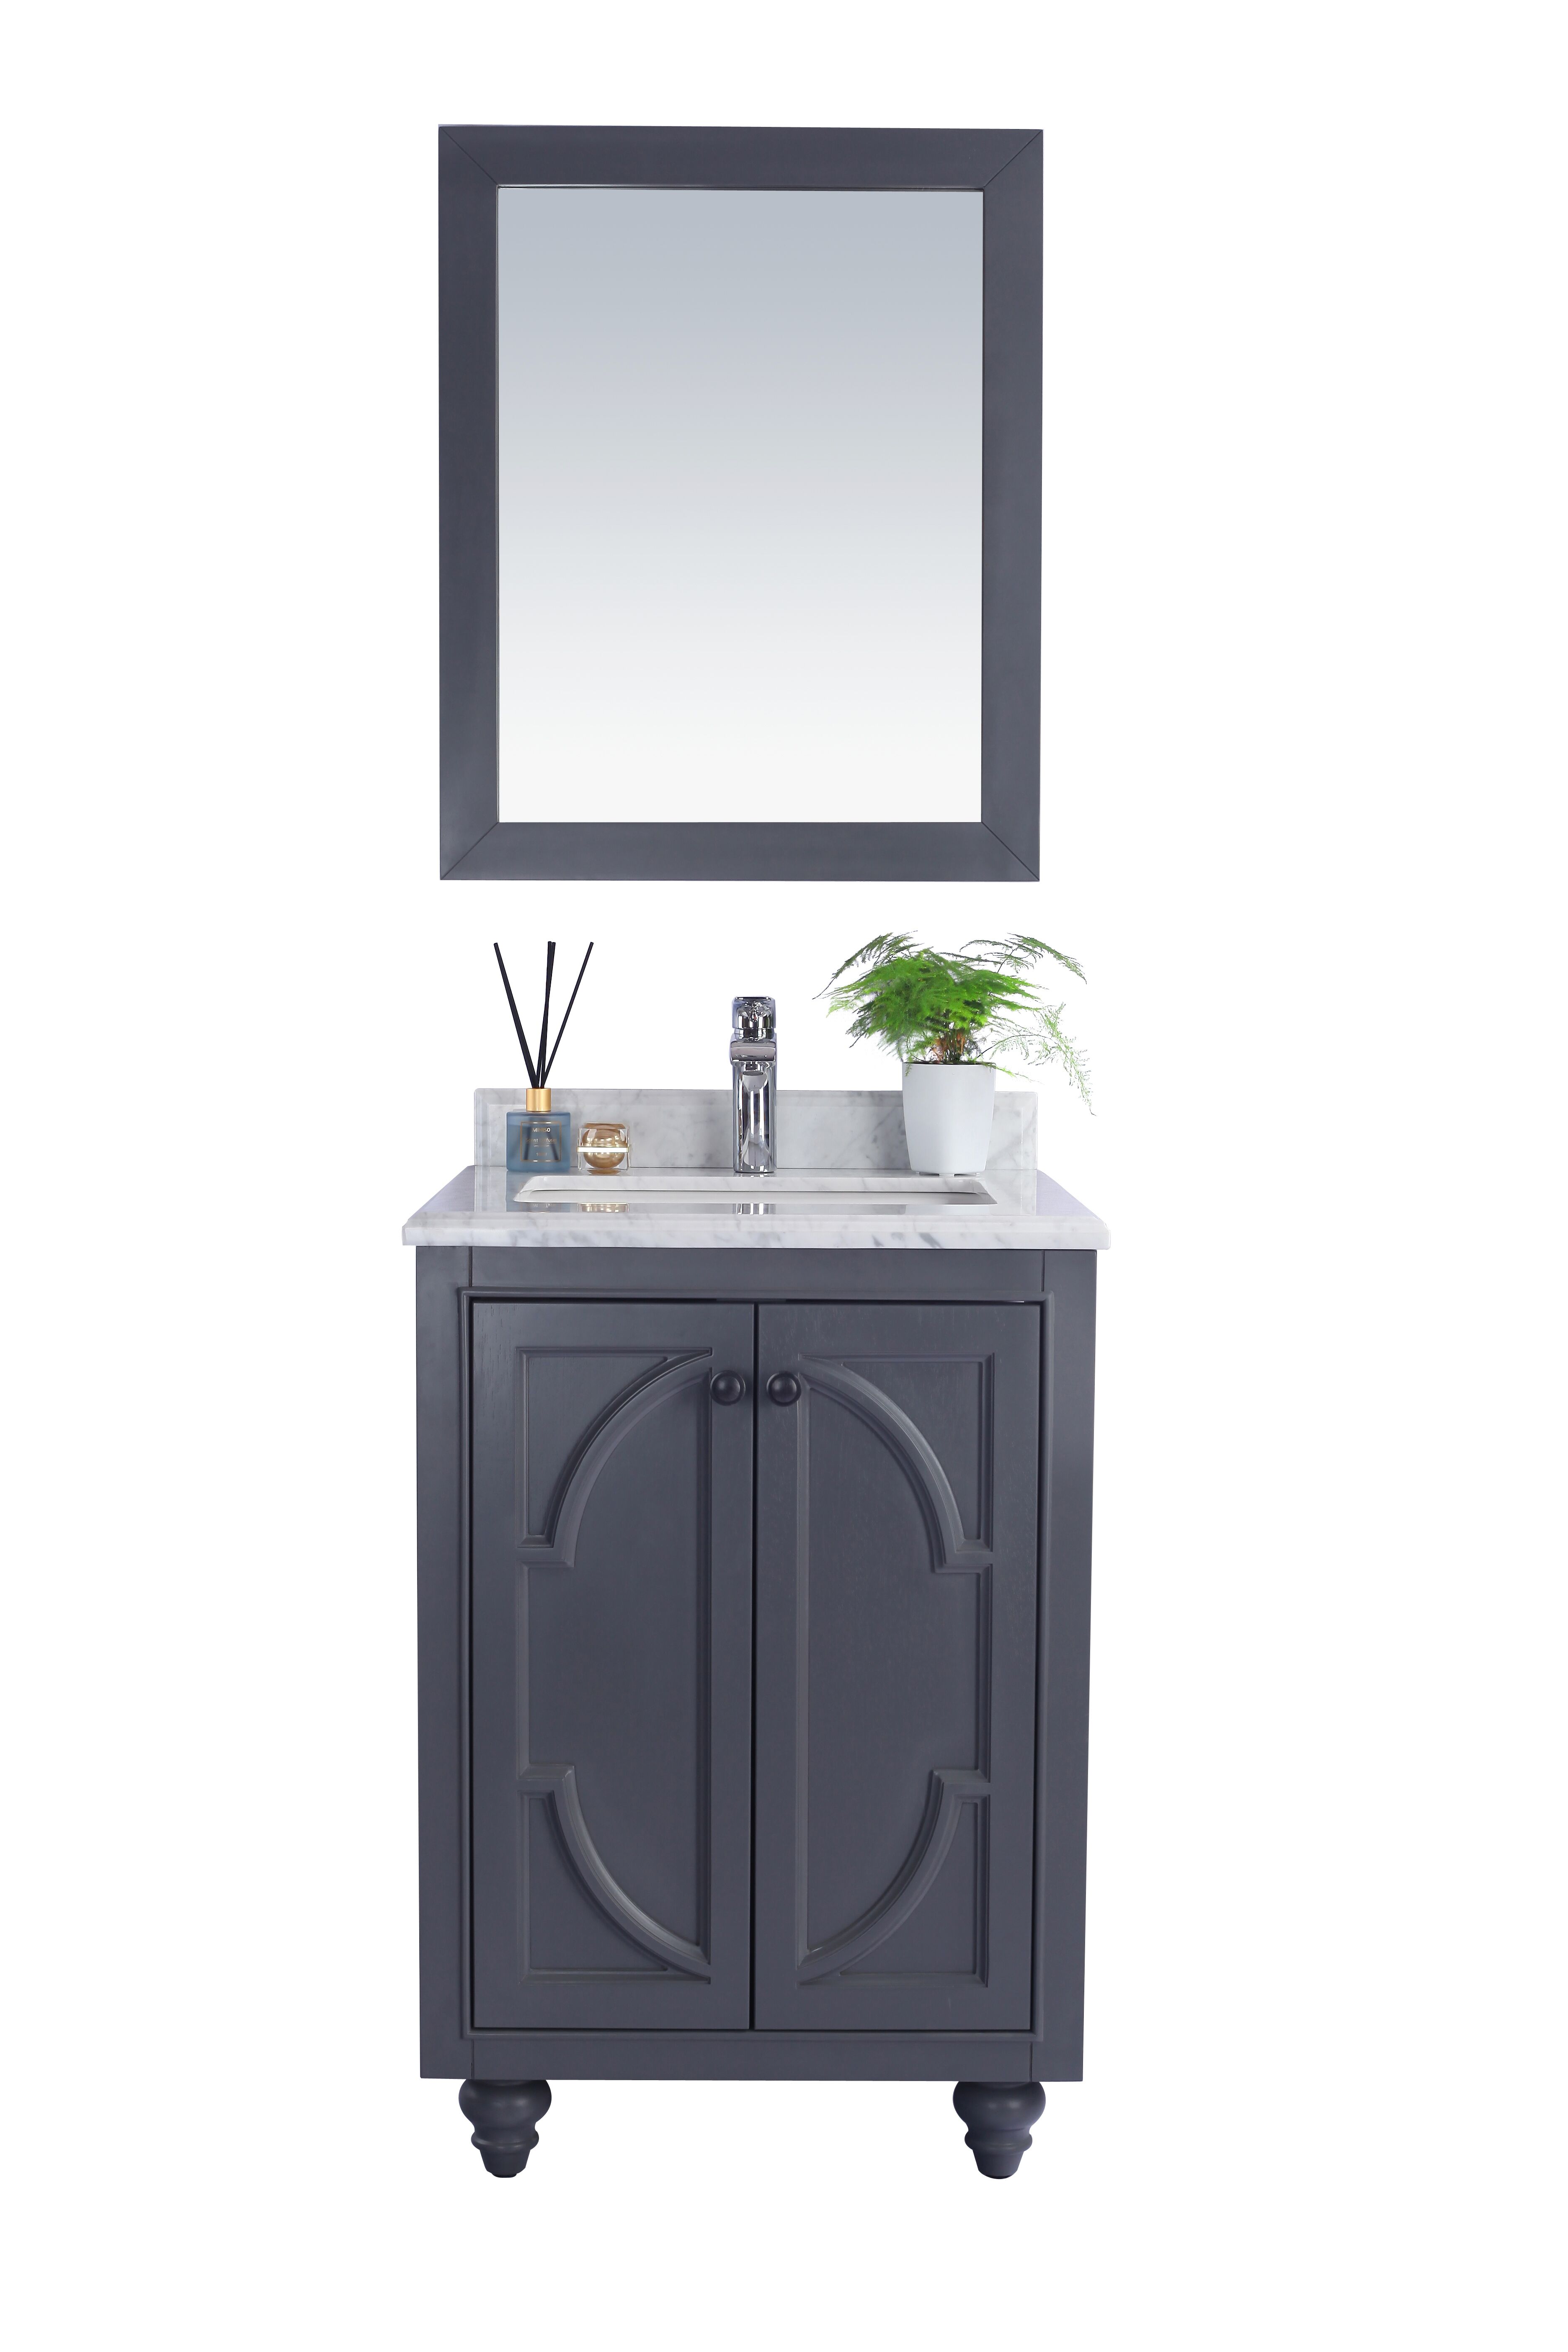 24" Single Bathroom Vanity Cabinet + Top and Color Options